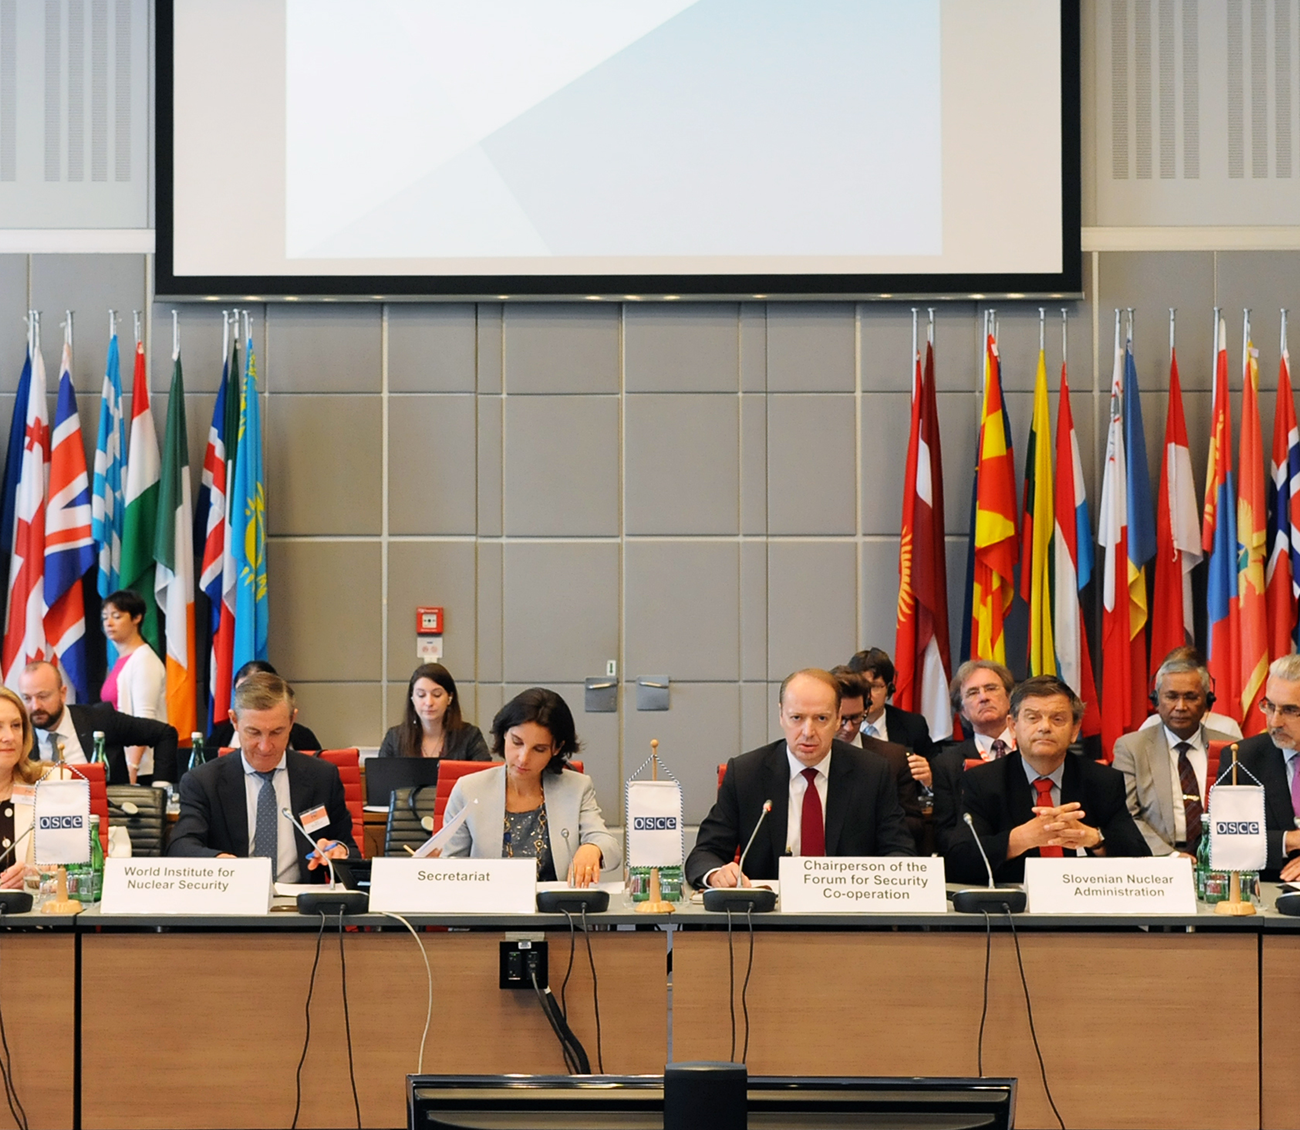 Importance of Nuclear Security and Cooperation Highlighted at OSCE Forum